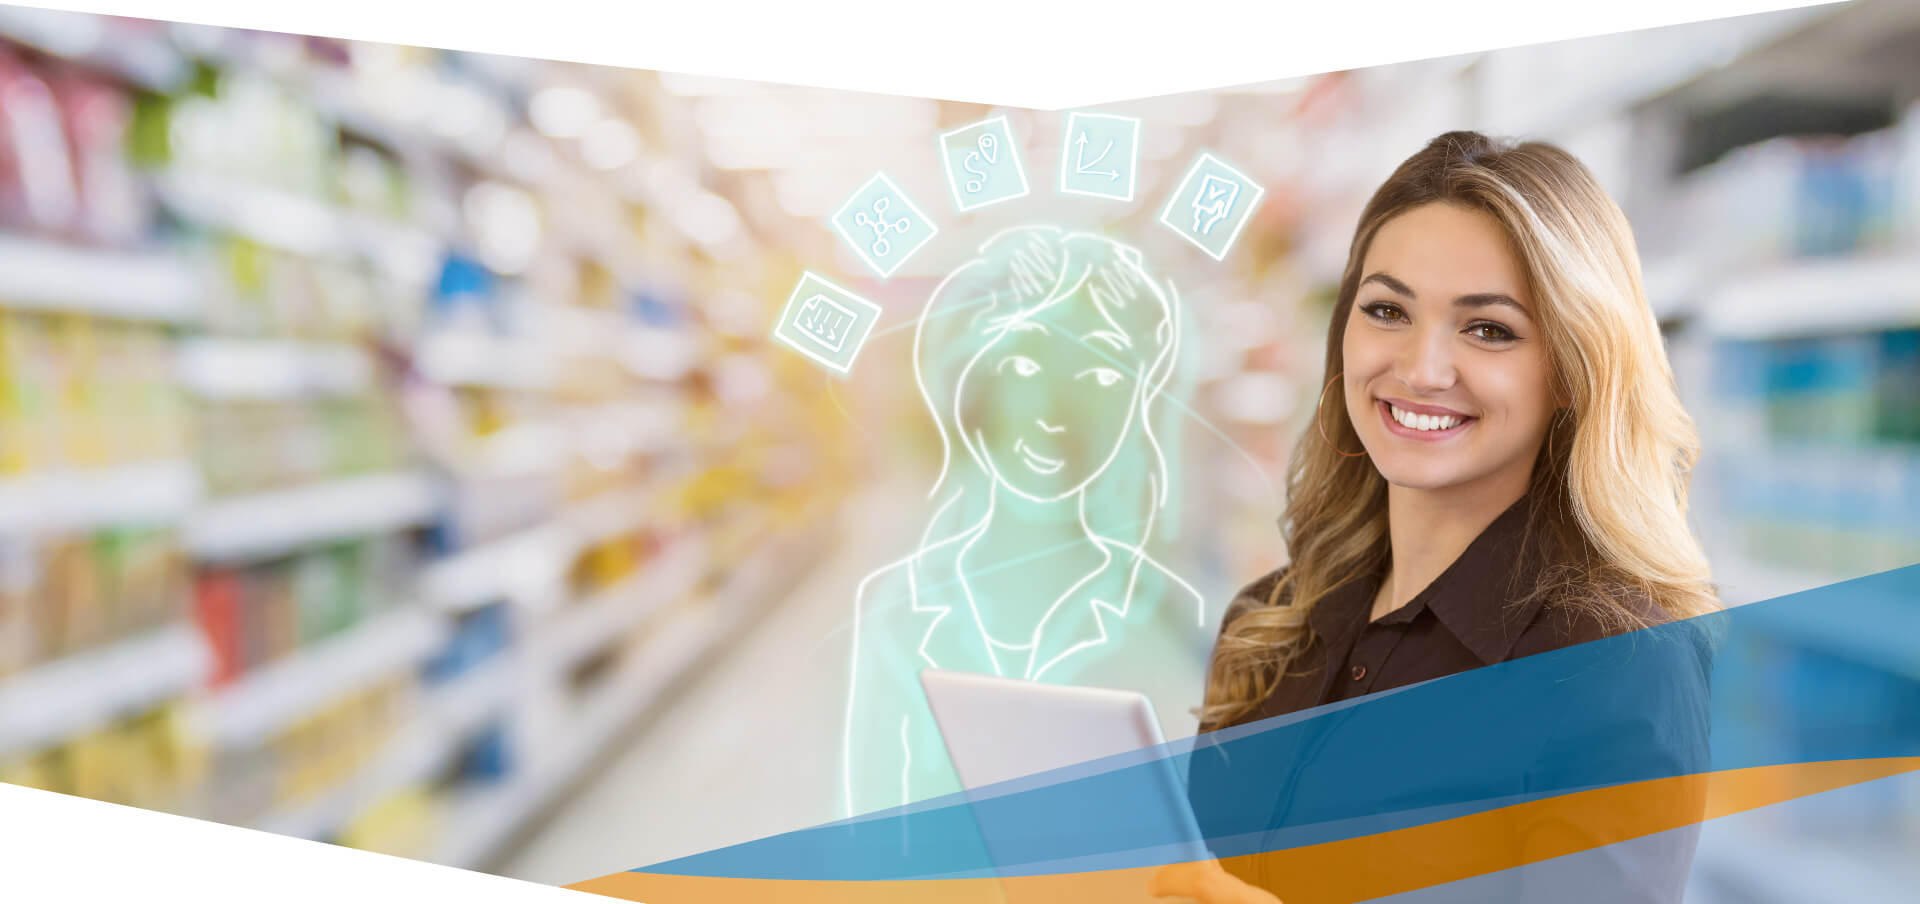 With DeDeSales, your sales staff have a complete overview of orders and customers.